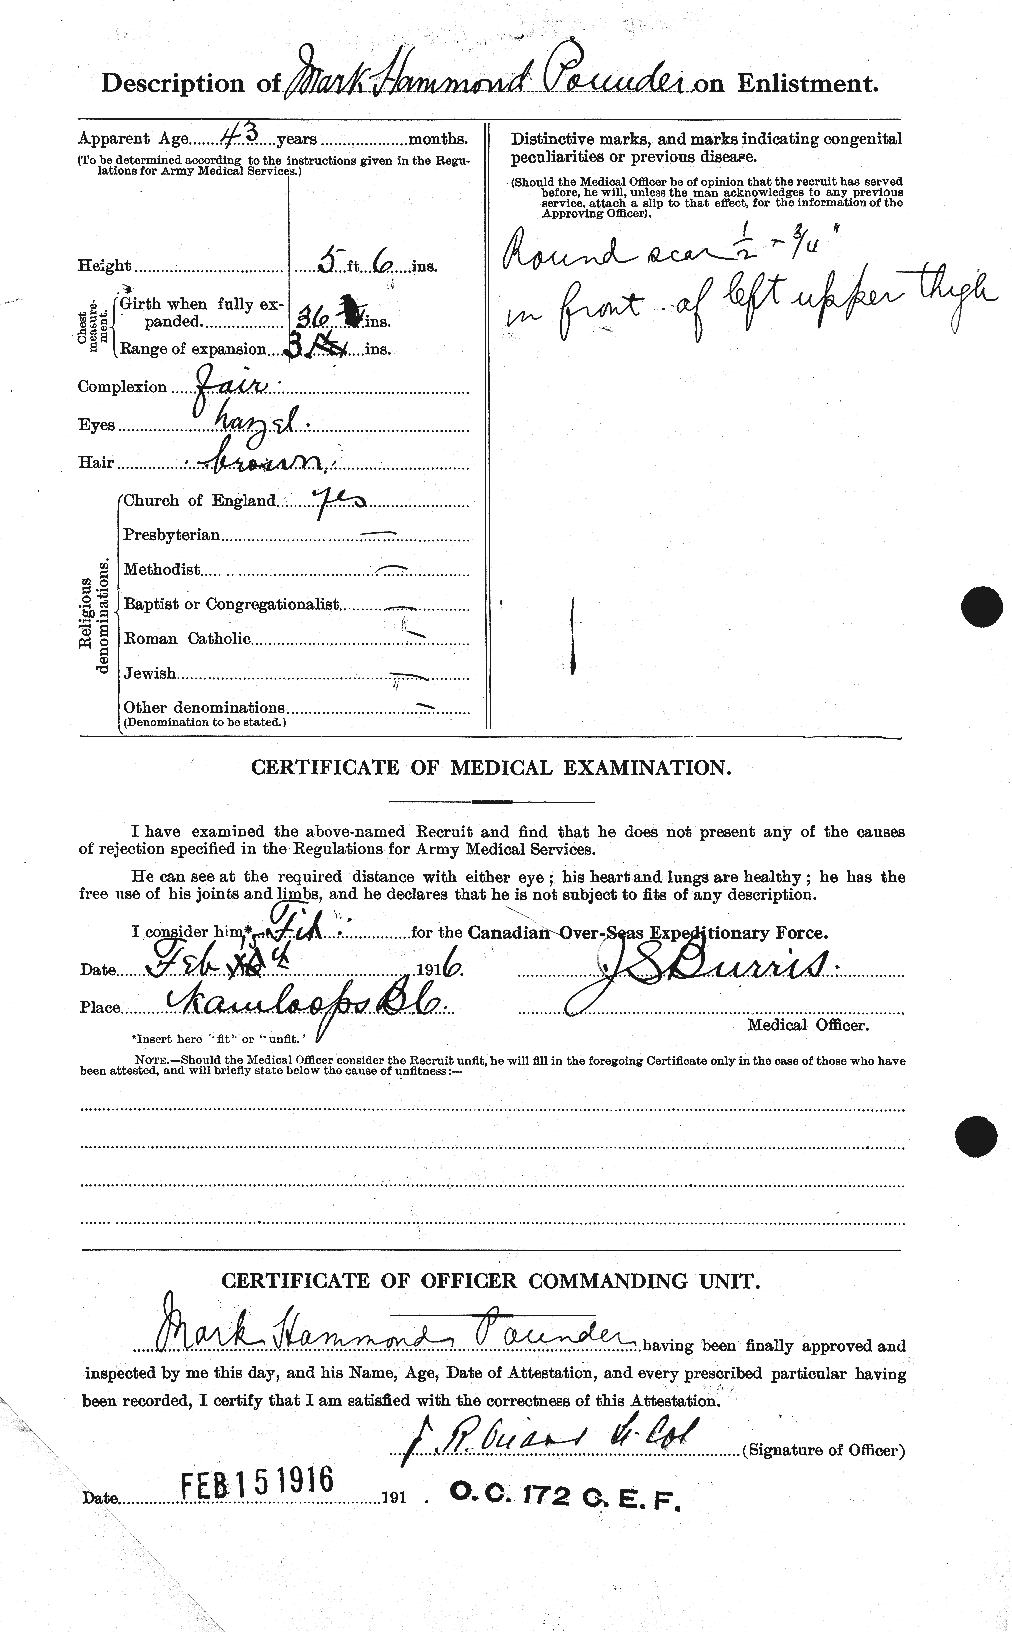 Personnel Records of the First World War - CEF 584988b